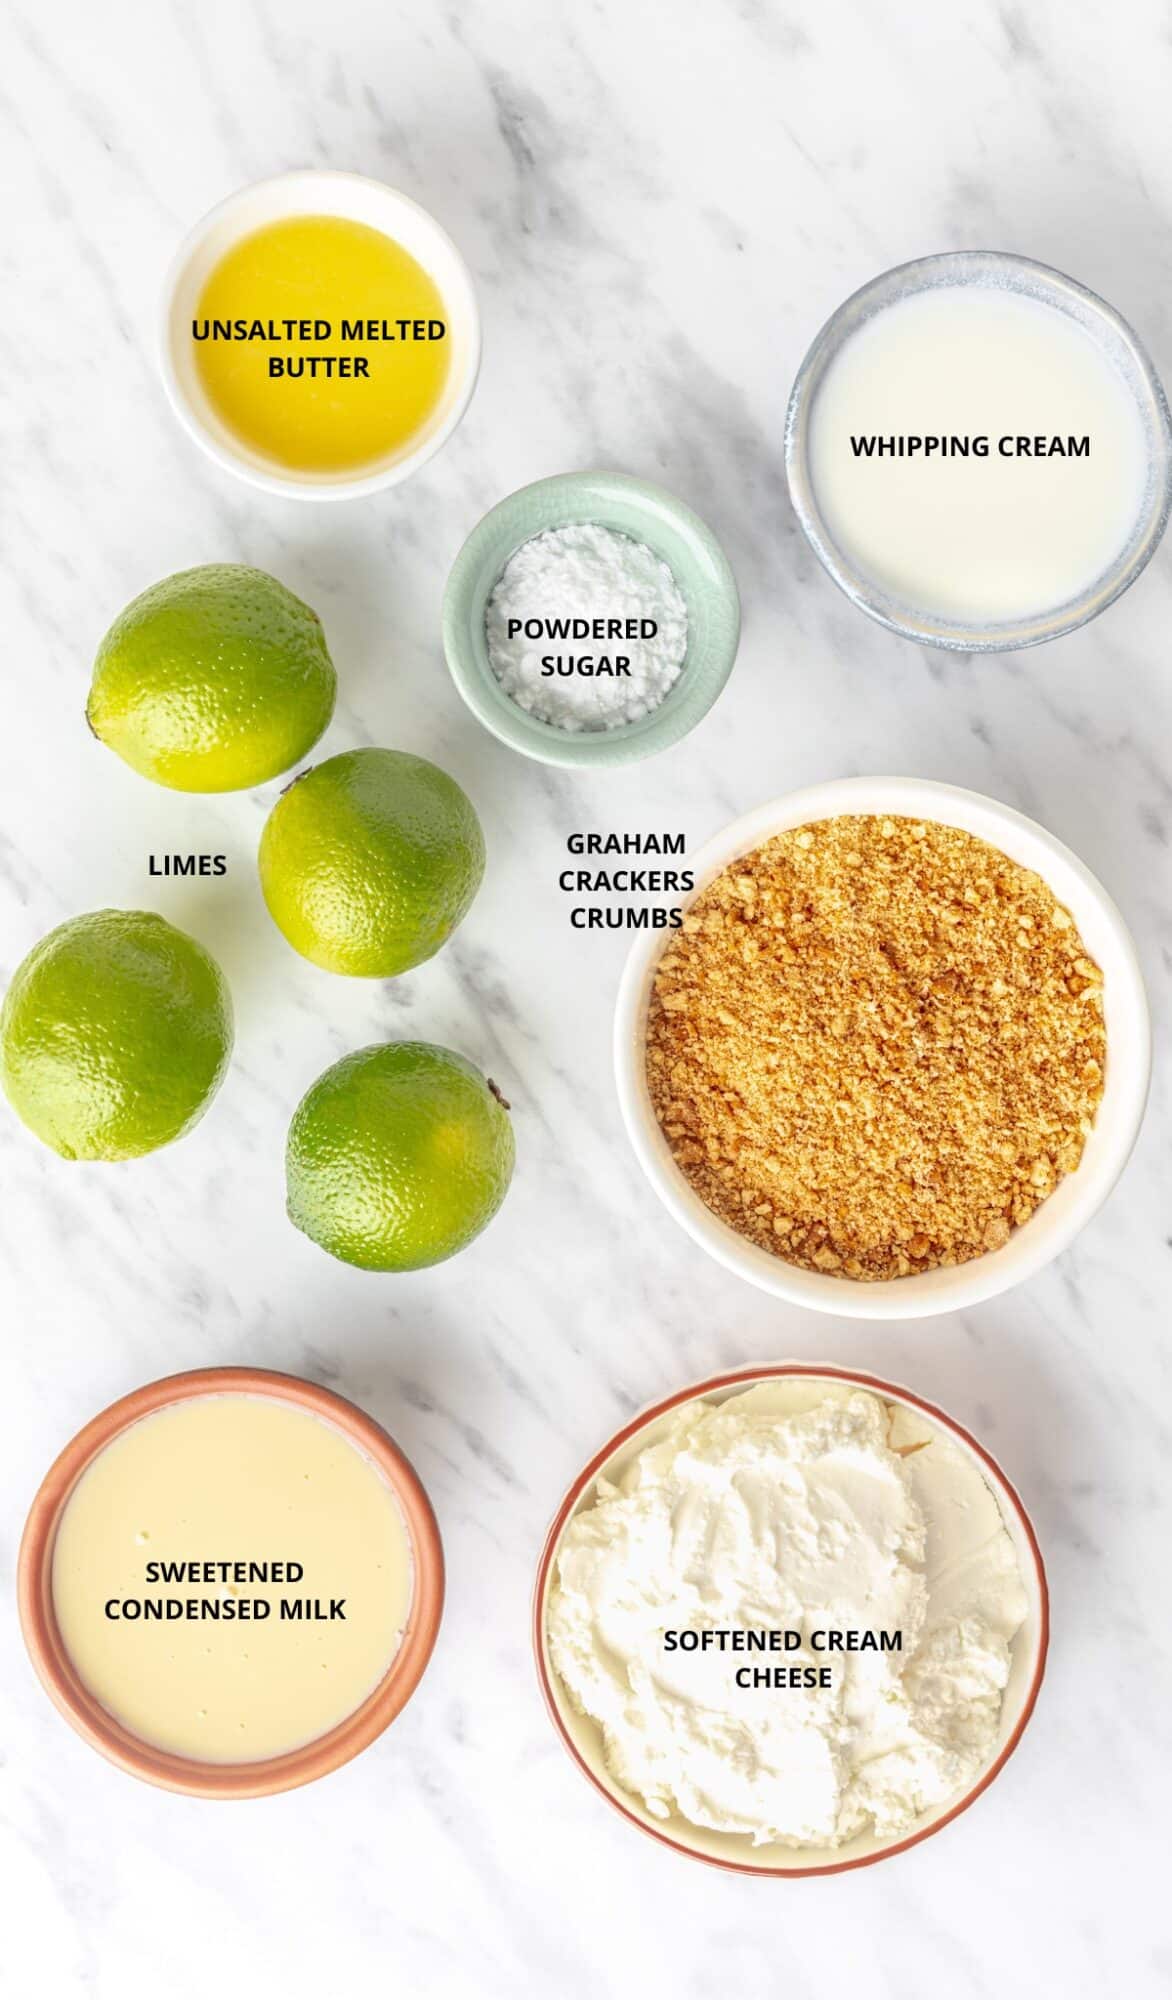 Melted butter, whipping cream, powdered sugar, whipping cream, four limes, graham crackers, sweetened condensed milk, and cream cheese in individual dishes for key lime dessert.